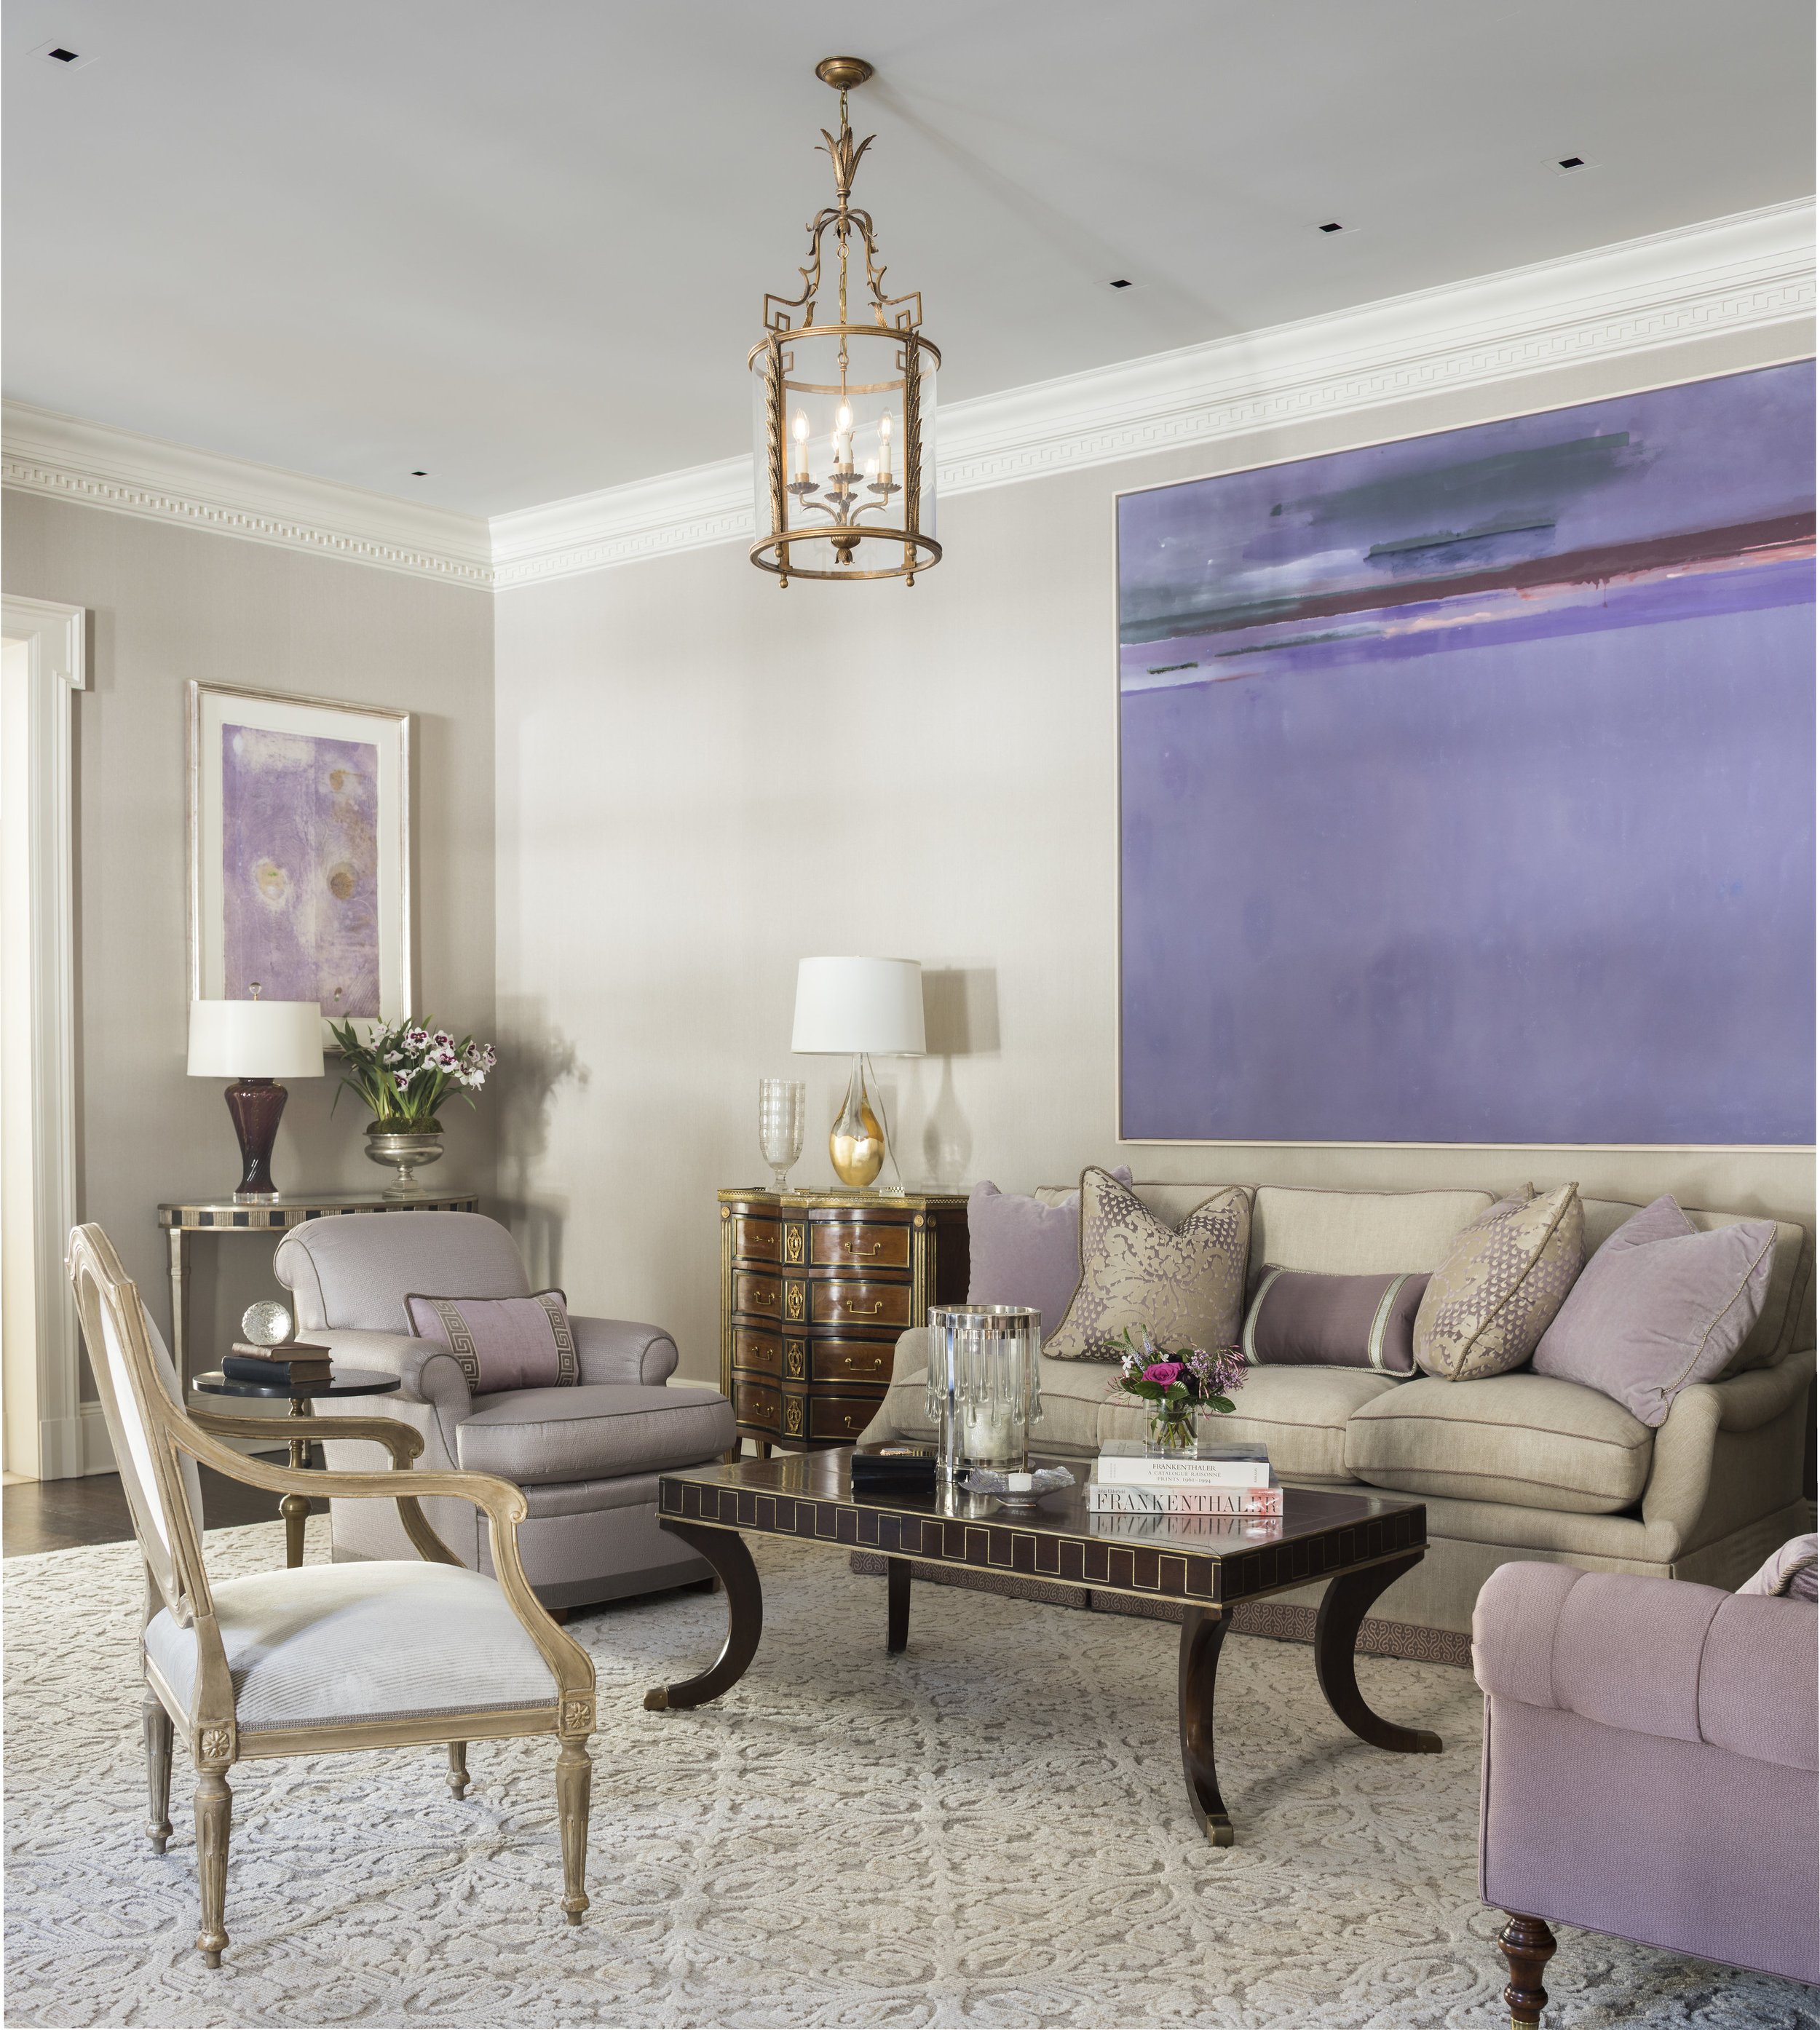 72-sitting-area-purple-chic-art-couch-chairs-texture-style-rinfret-neoclassical-greenwich-connecticut.JPG